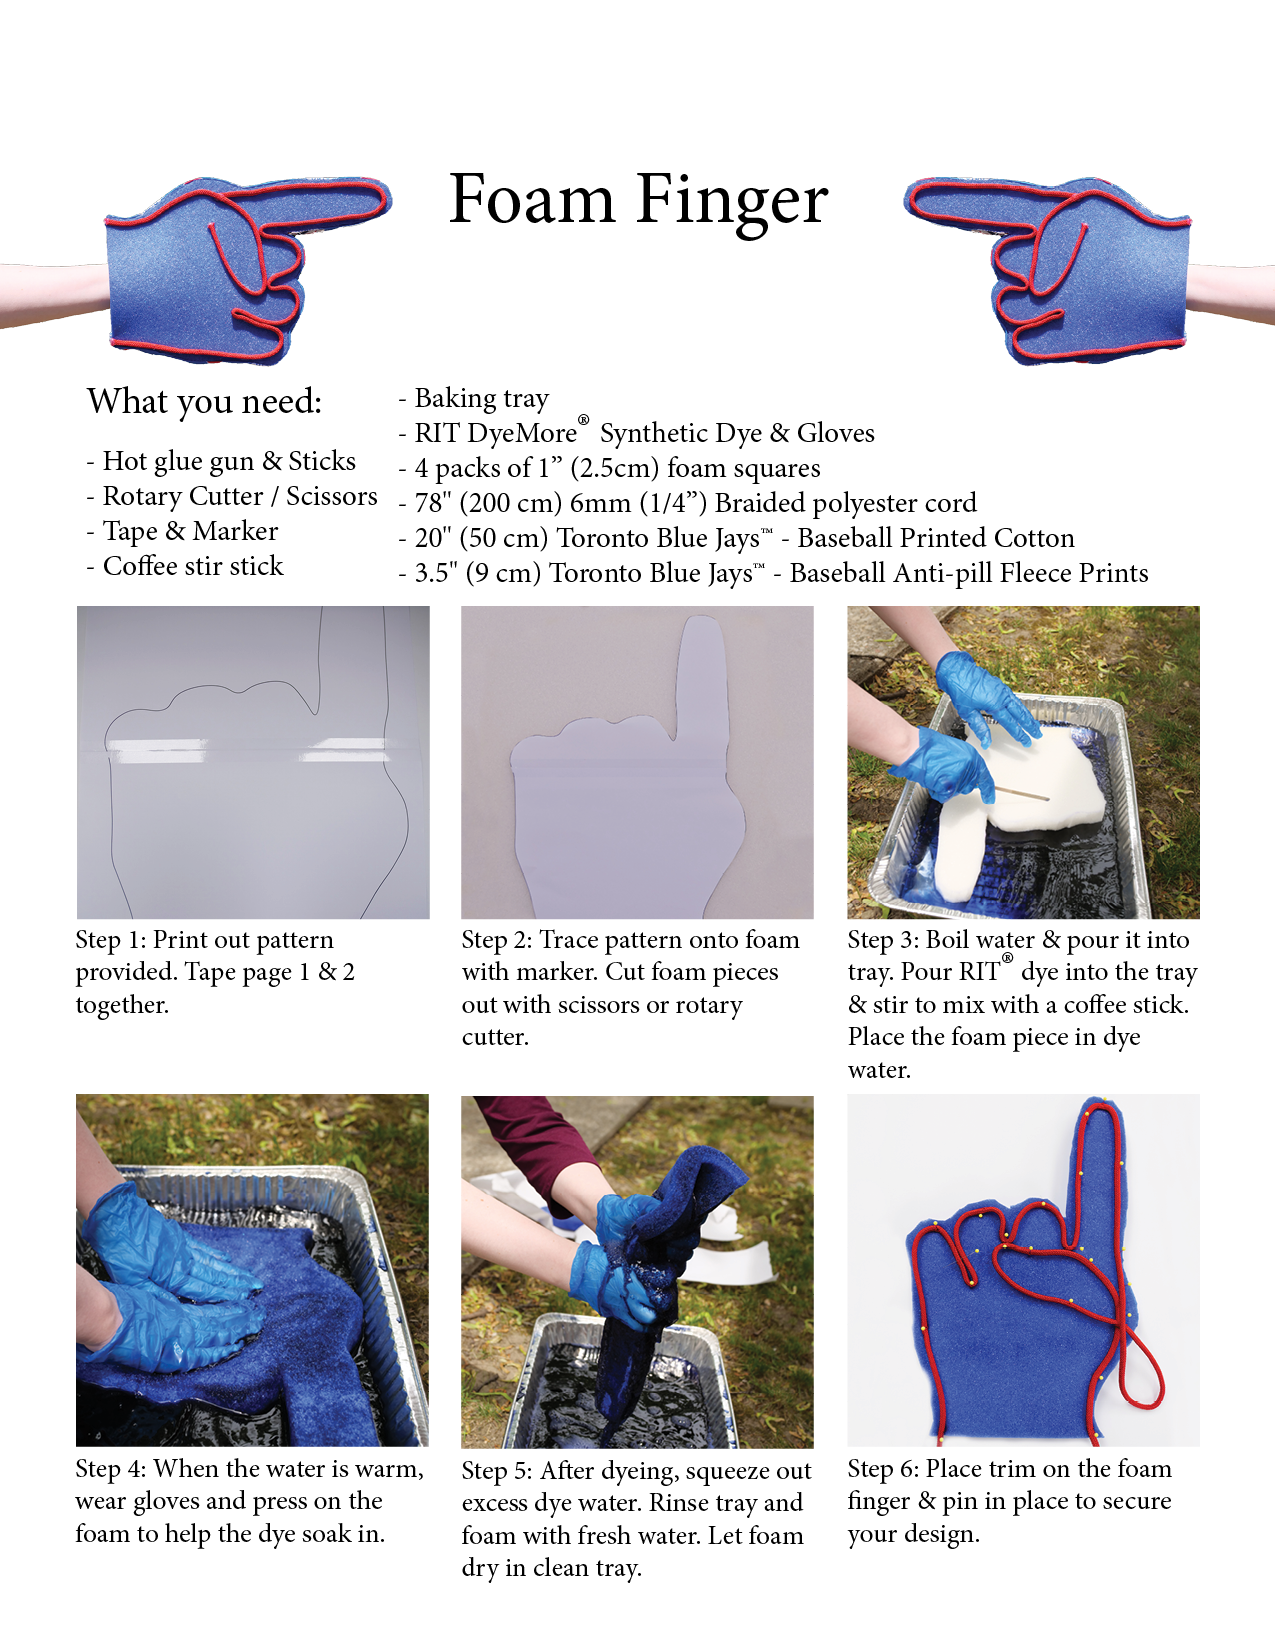 First set of steps to creating your own foam finger